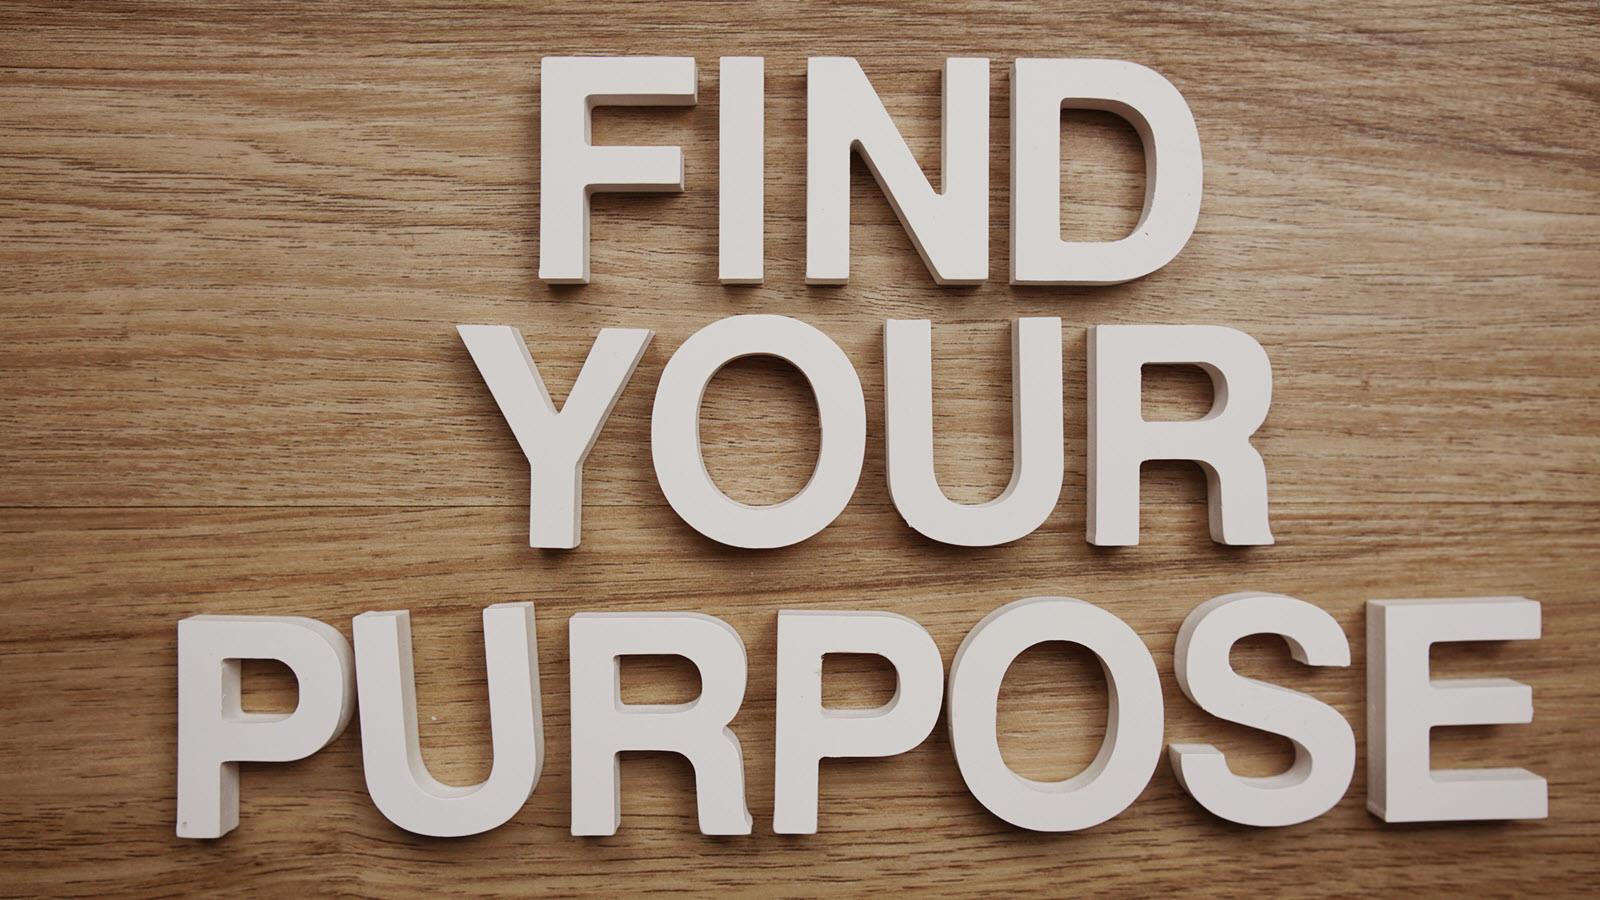 Find Your Purpose sign